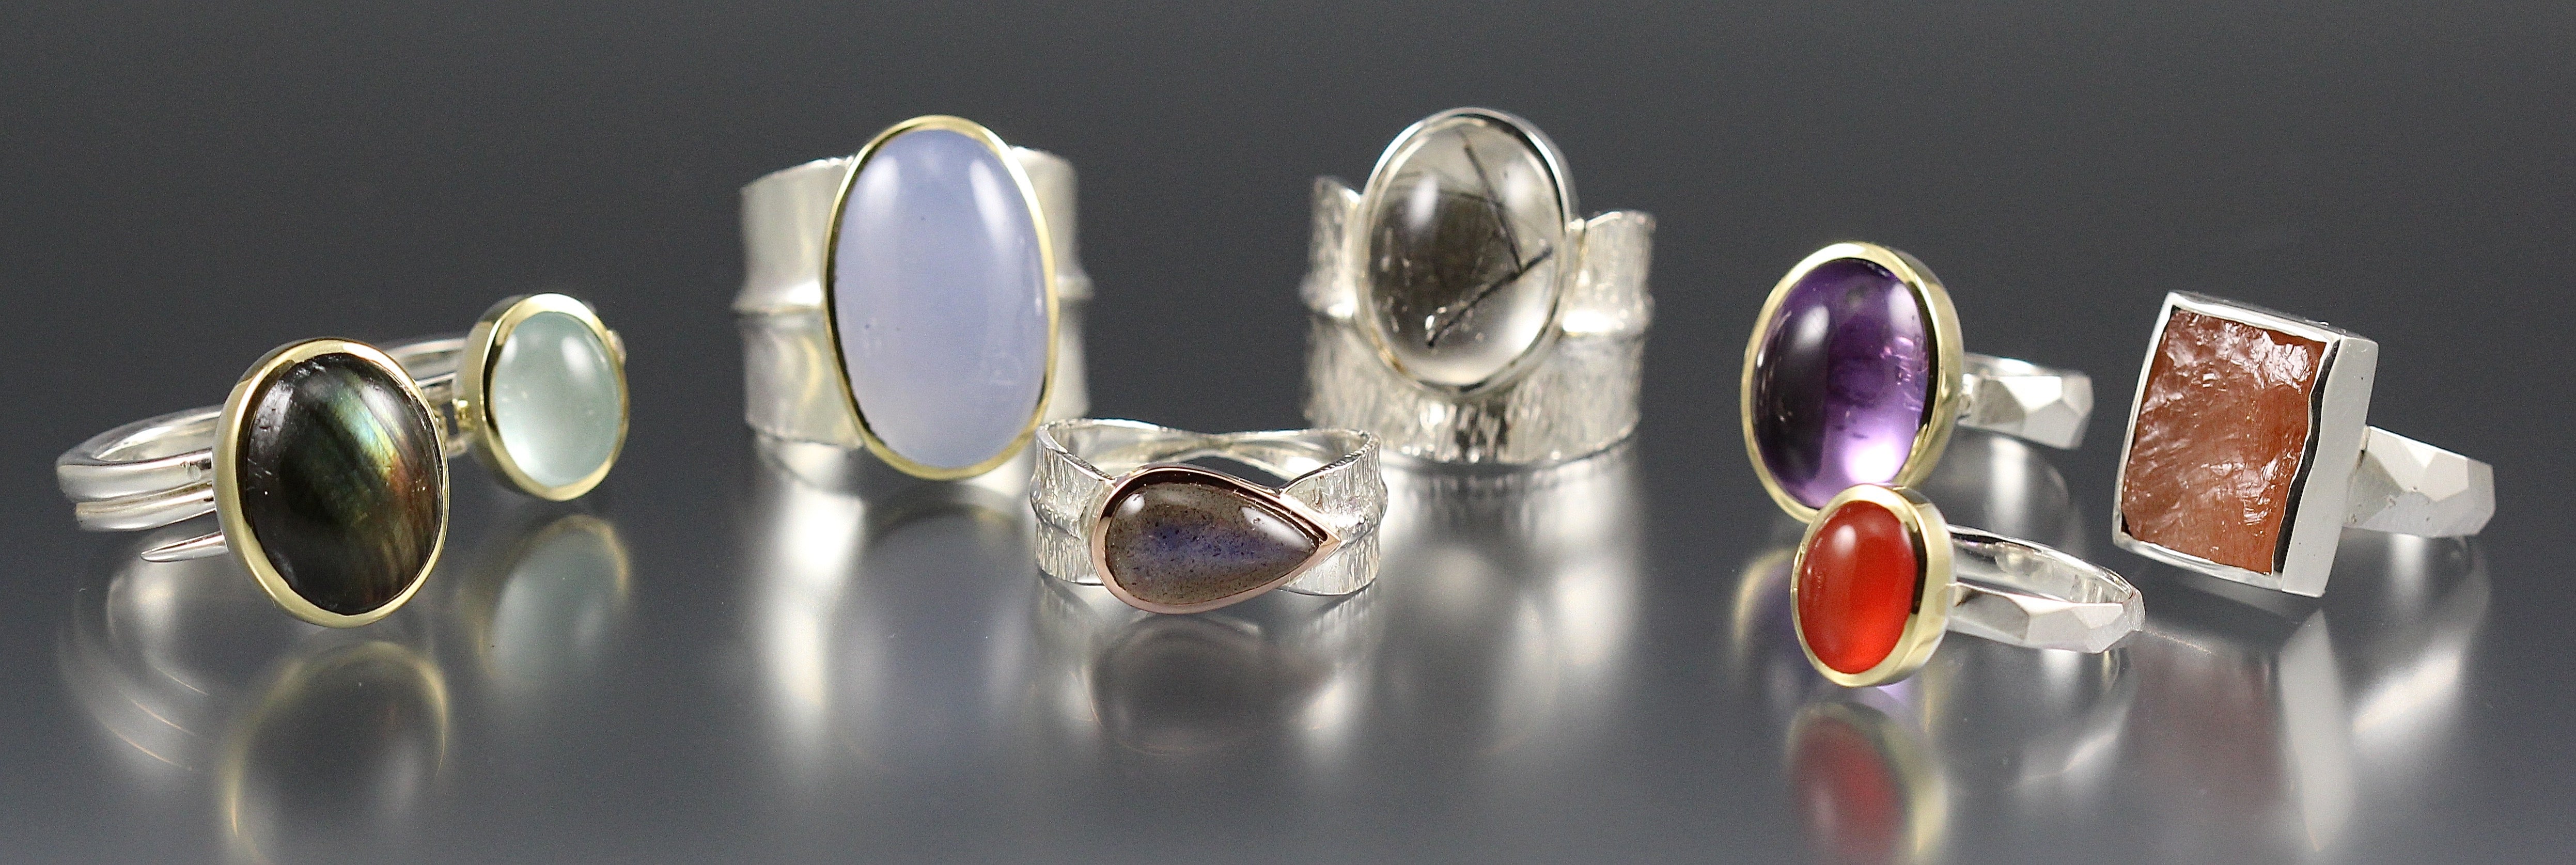 Cocktail Rings by Danielle Miller Jewelry